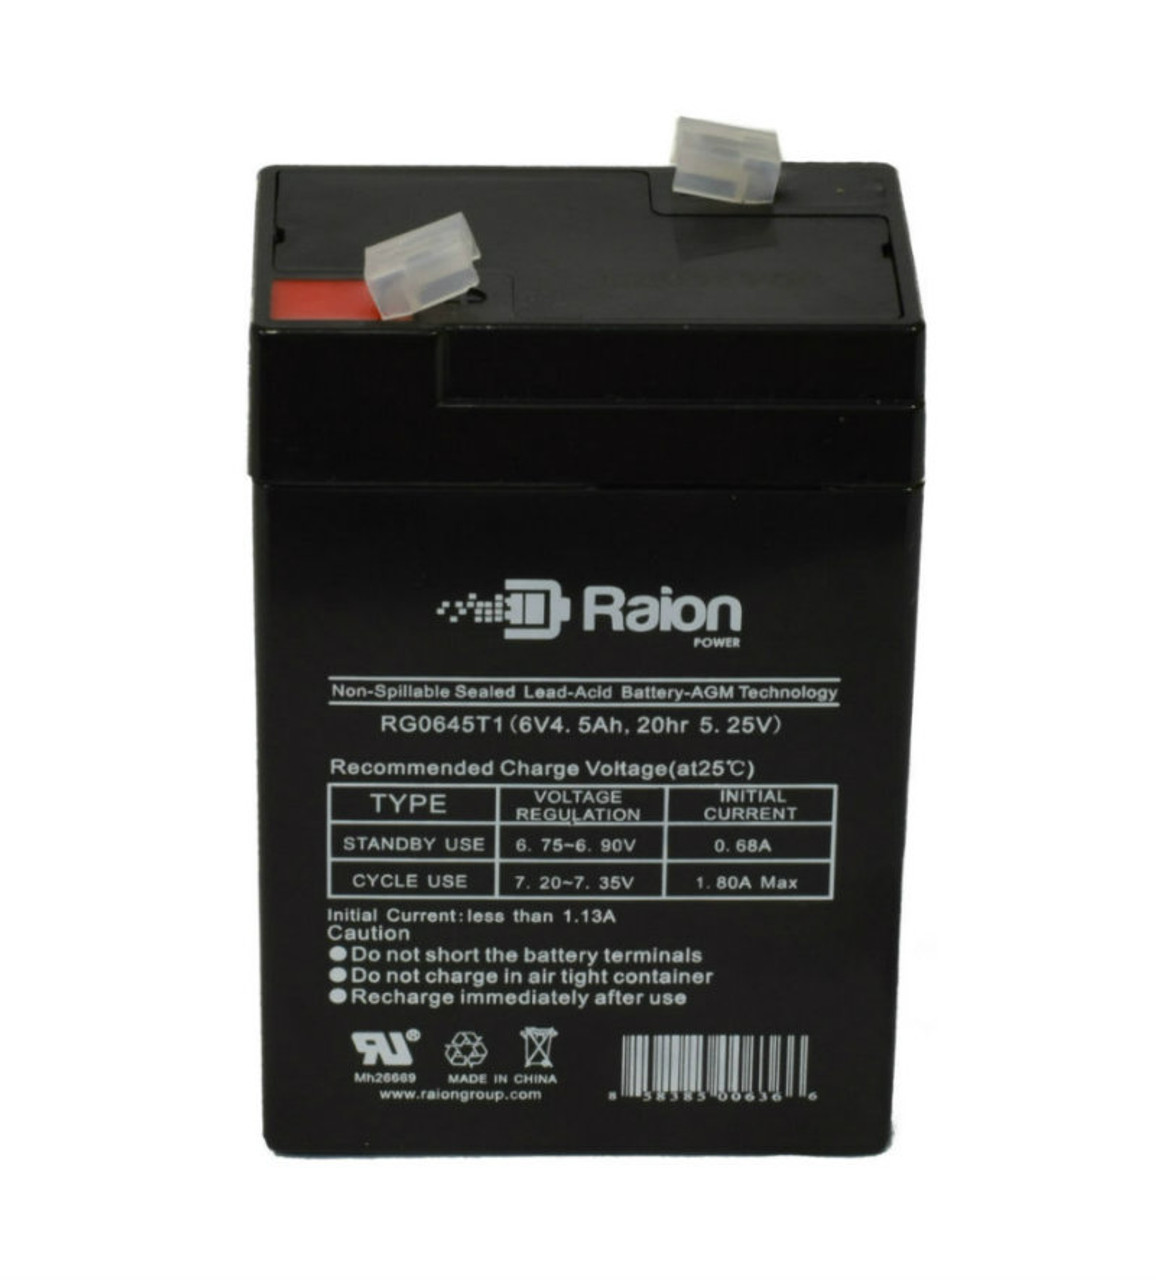 Raion Power RG0645T1 Replacement Battery Cartridge for Alaris Medical Intell Pump 2001